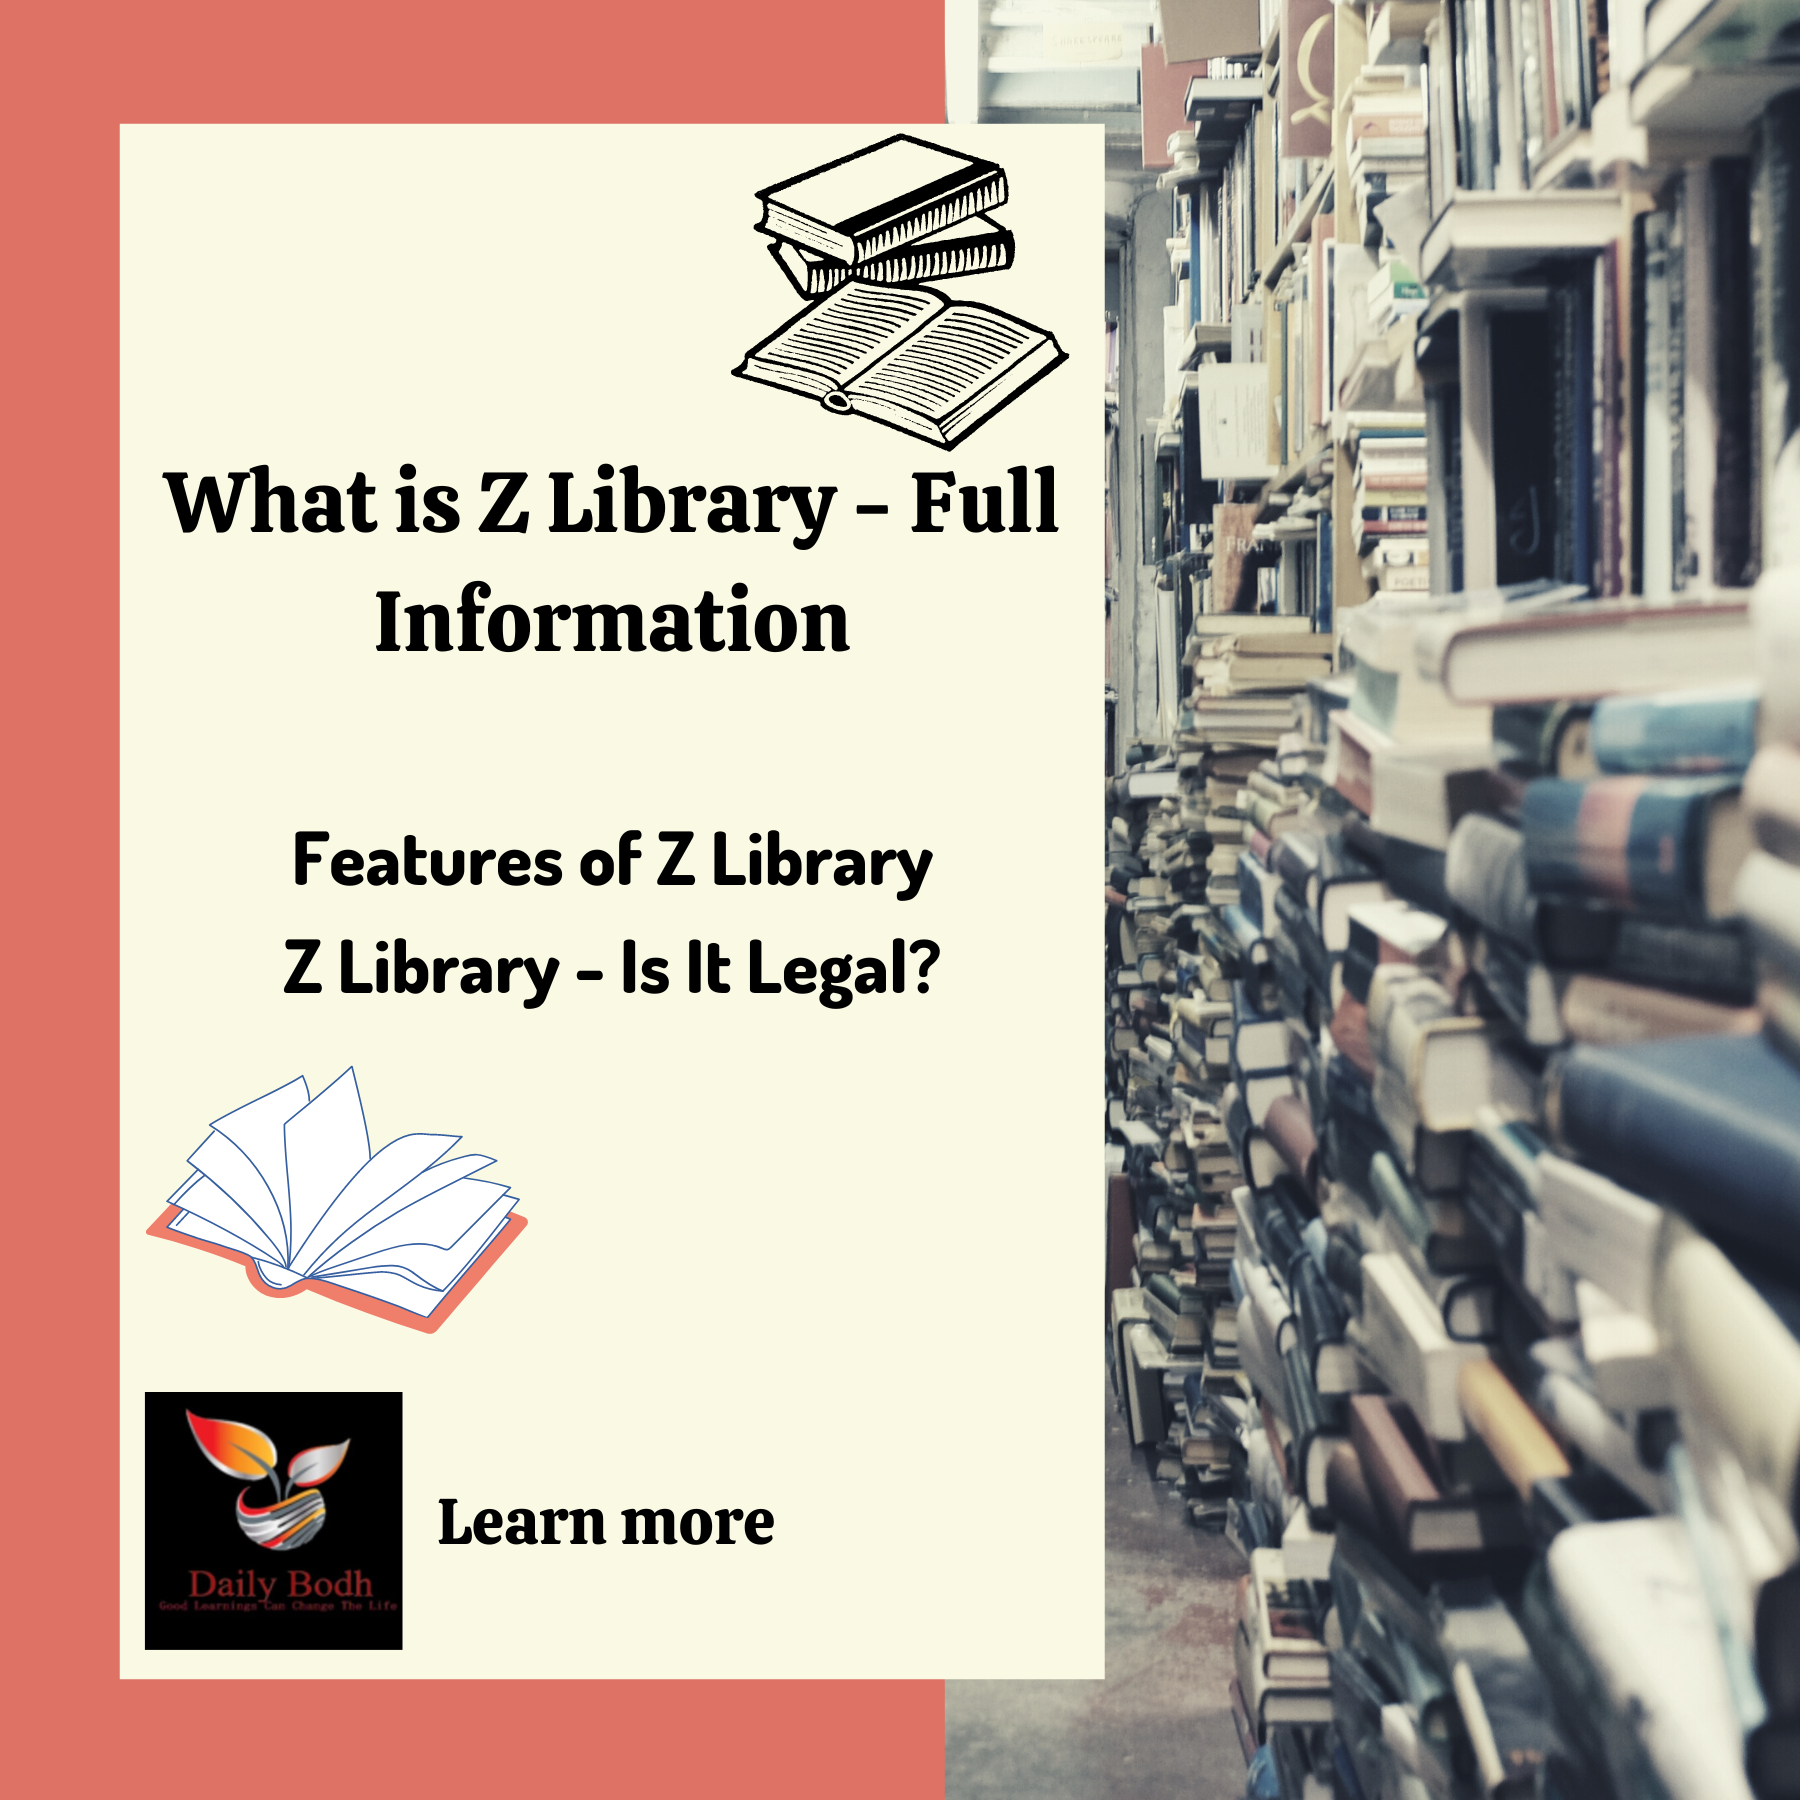 What is Z Library?